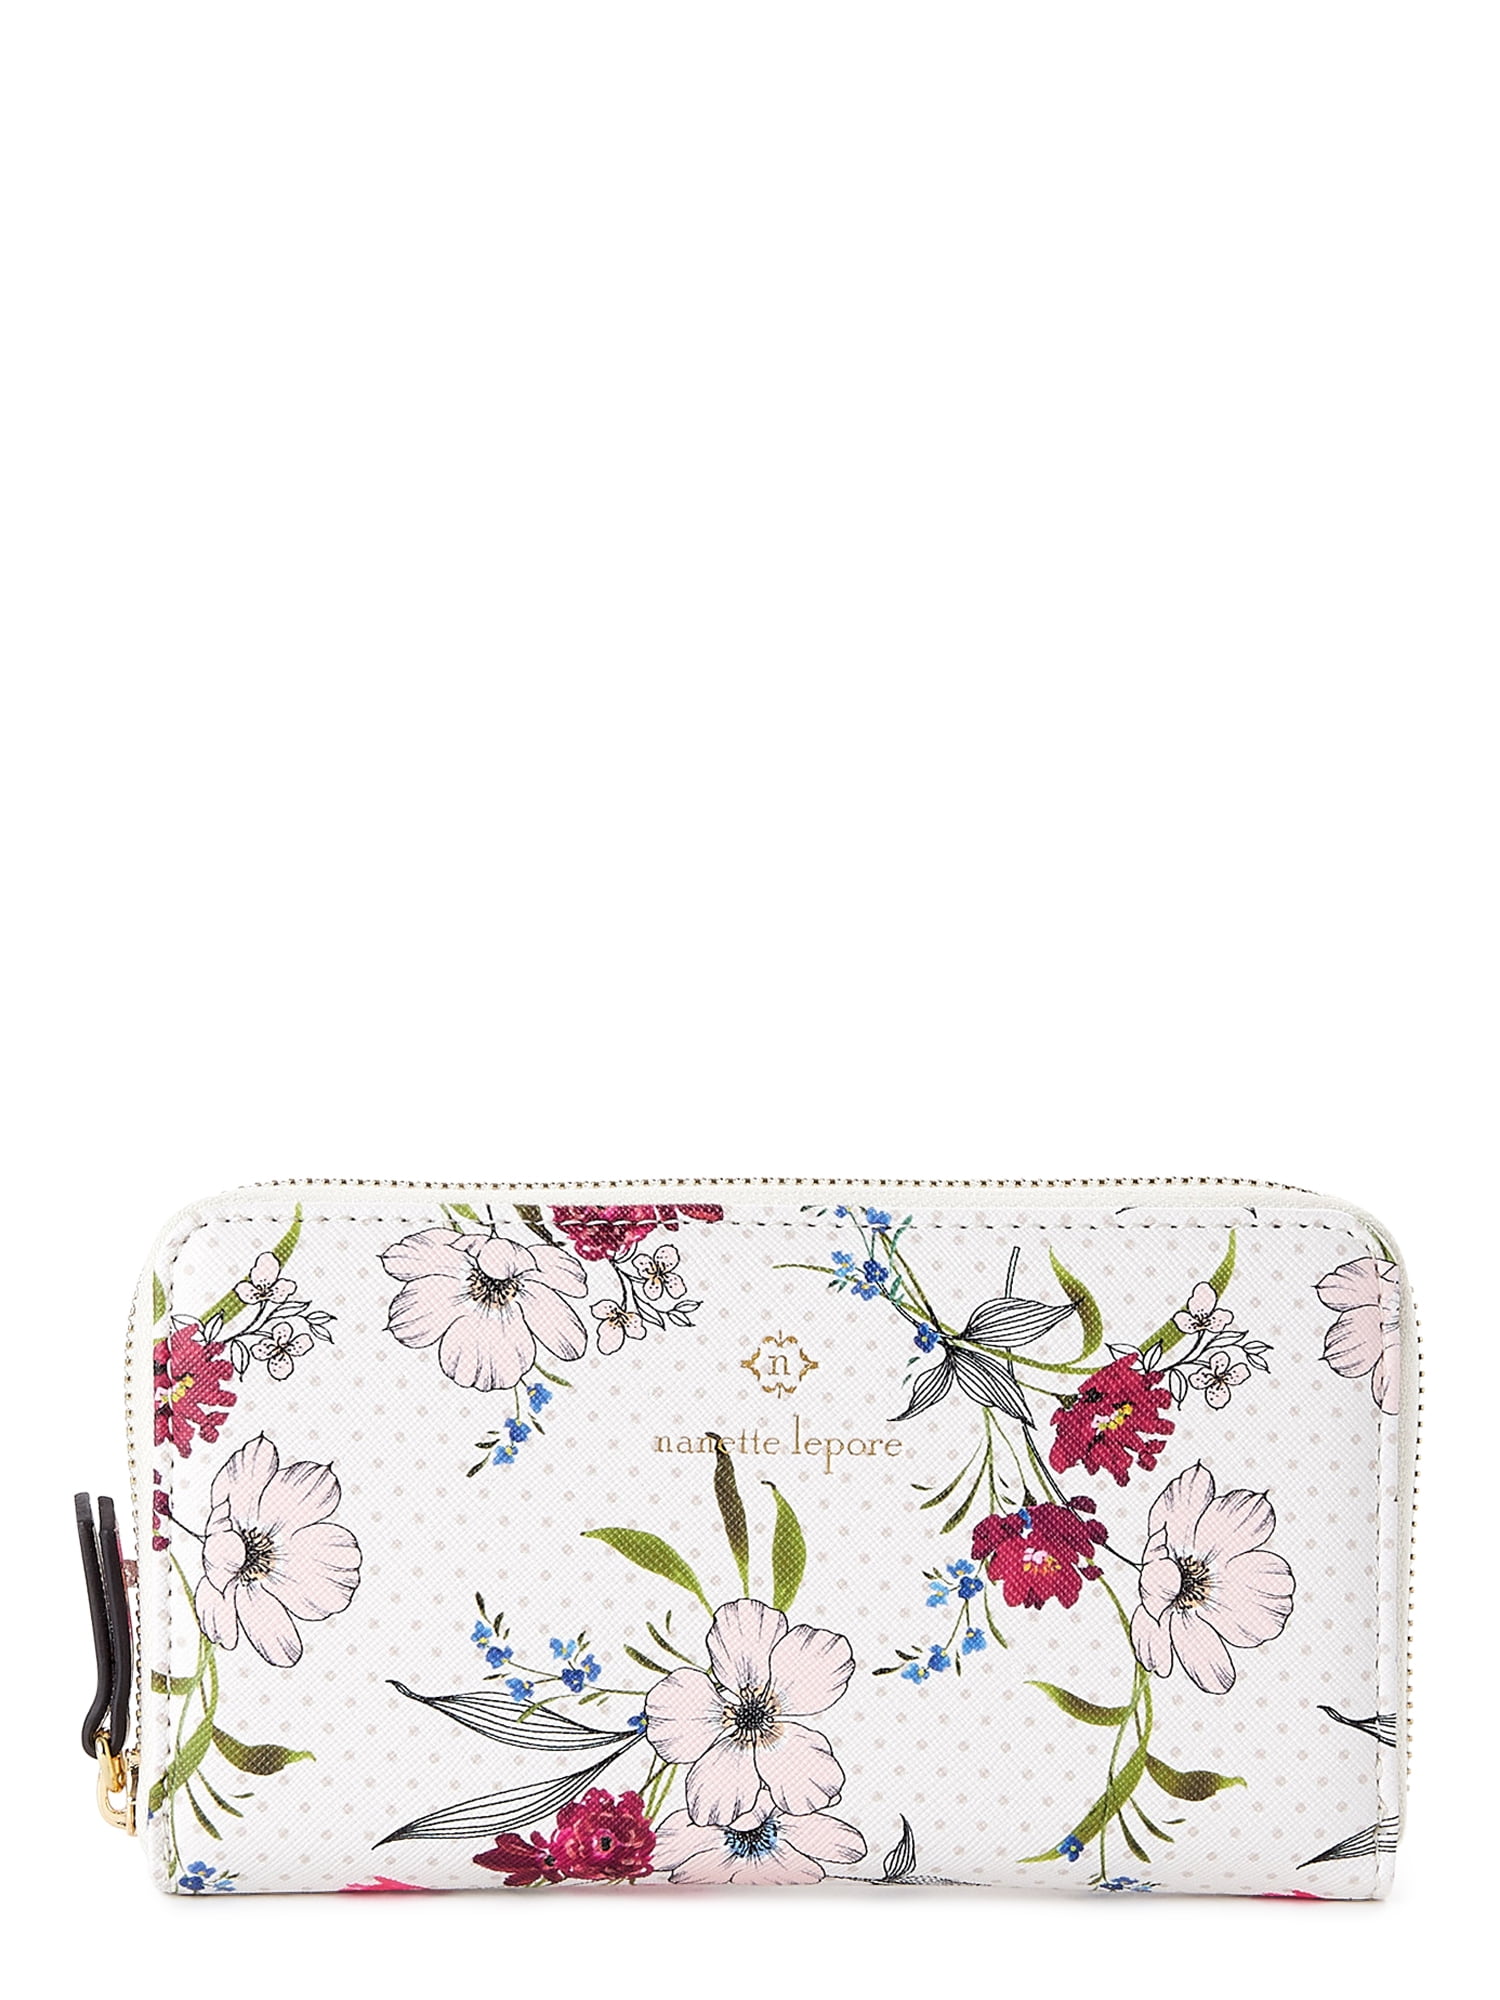 Multi Colored Floral Fabric Wristlet Zippered Wristlet IPhone Wristlet SmartPhone Wristlet